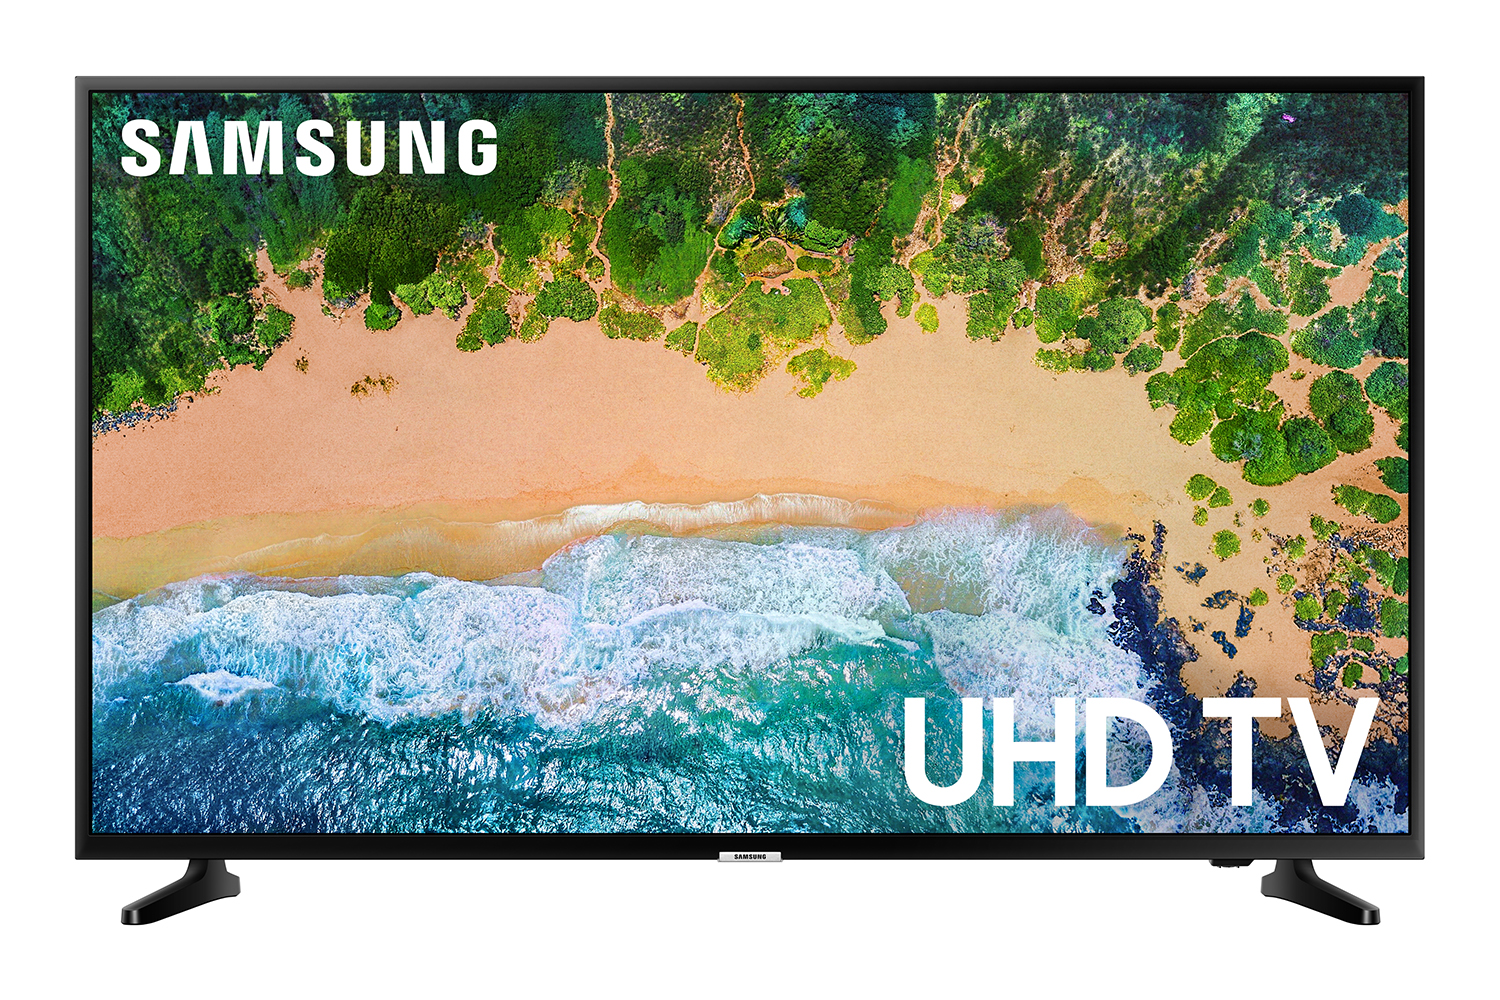 SAMSUNG 43" Class 4K UHD 2160p LED Smart TV with HDR UN43NU6900 - image 1 of 23